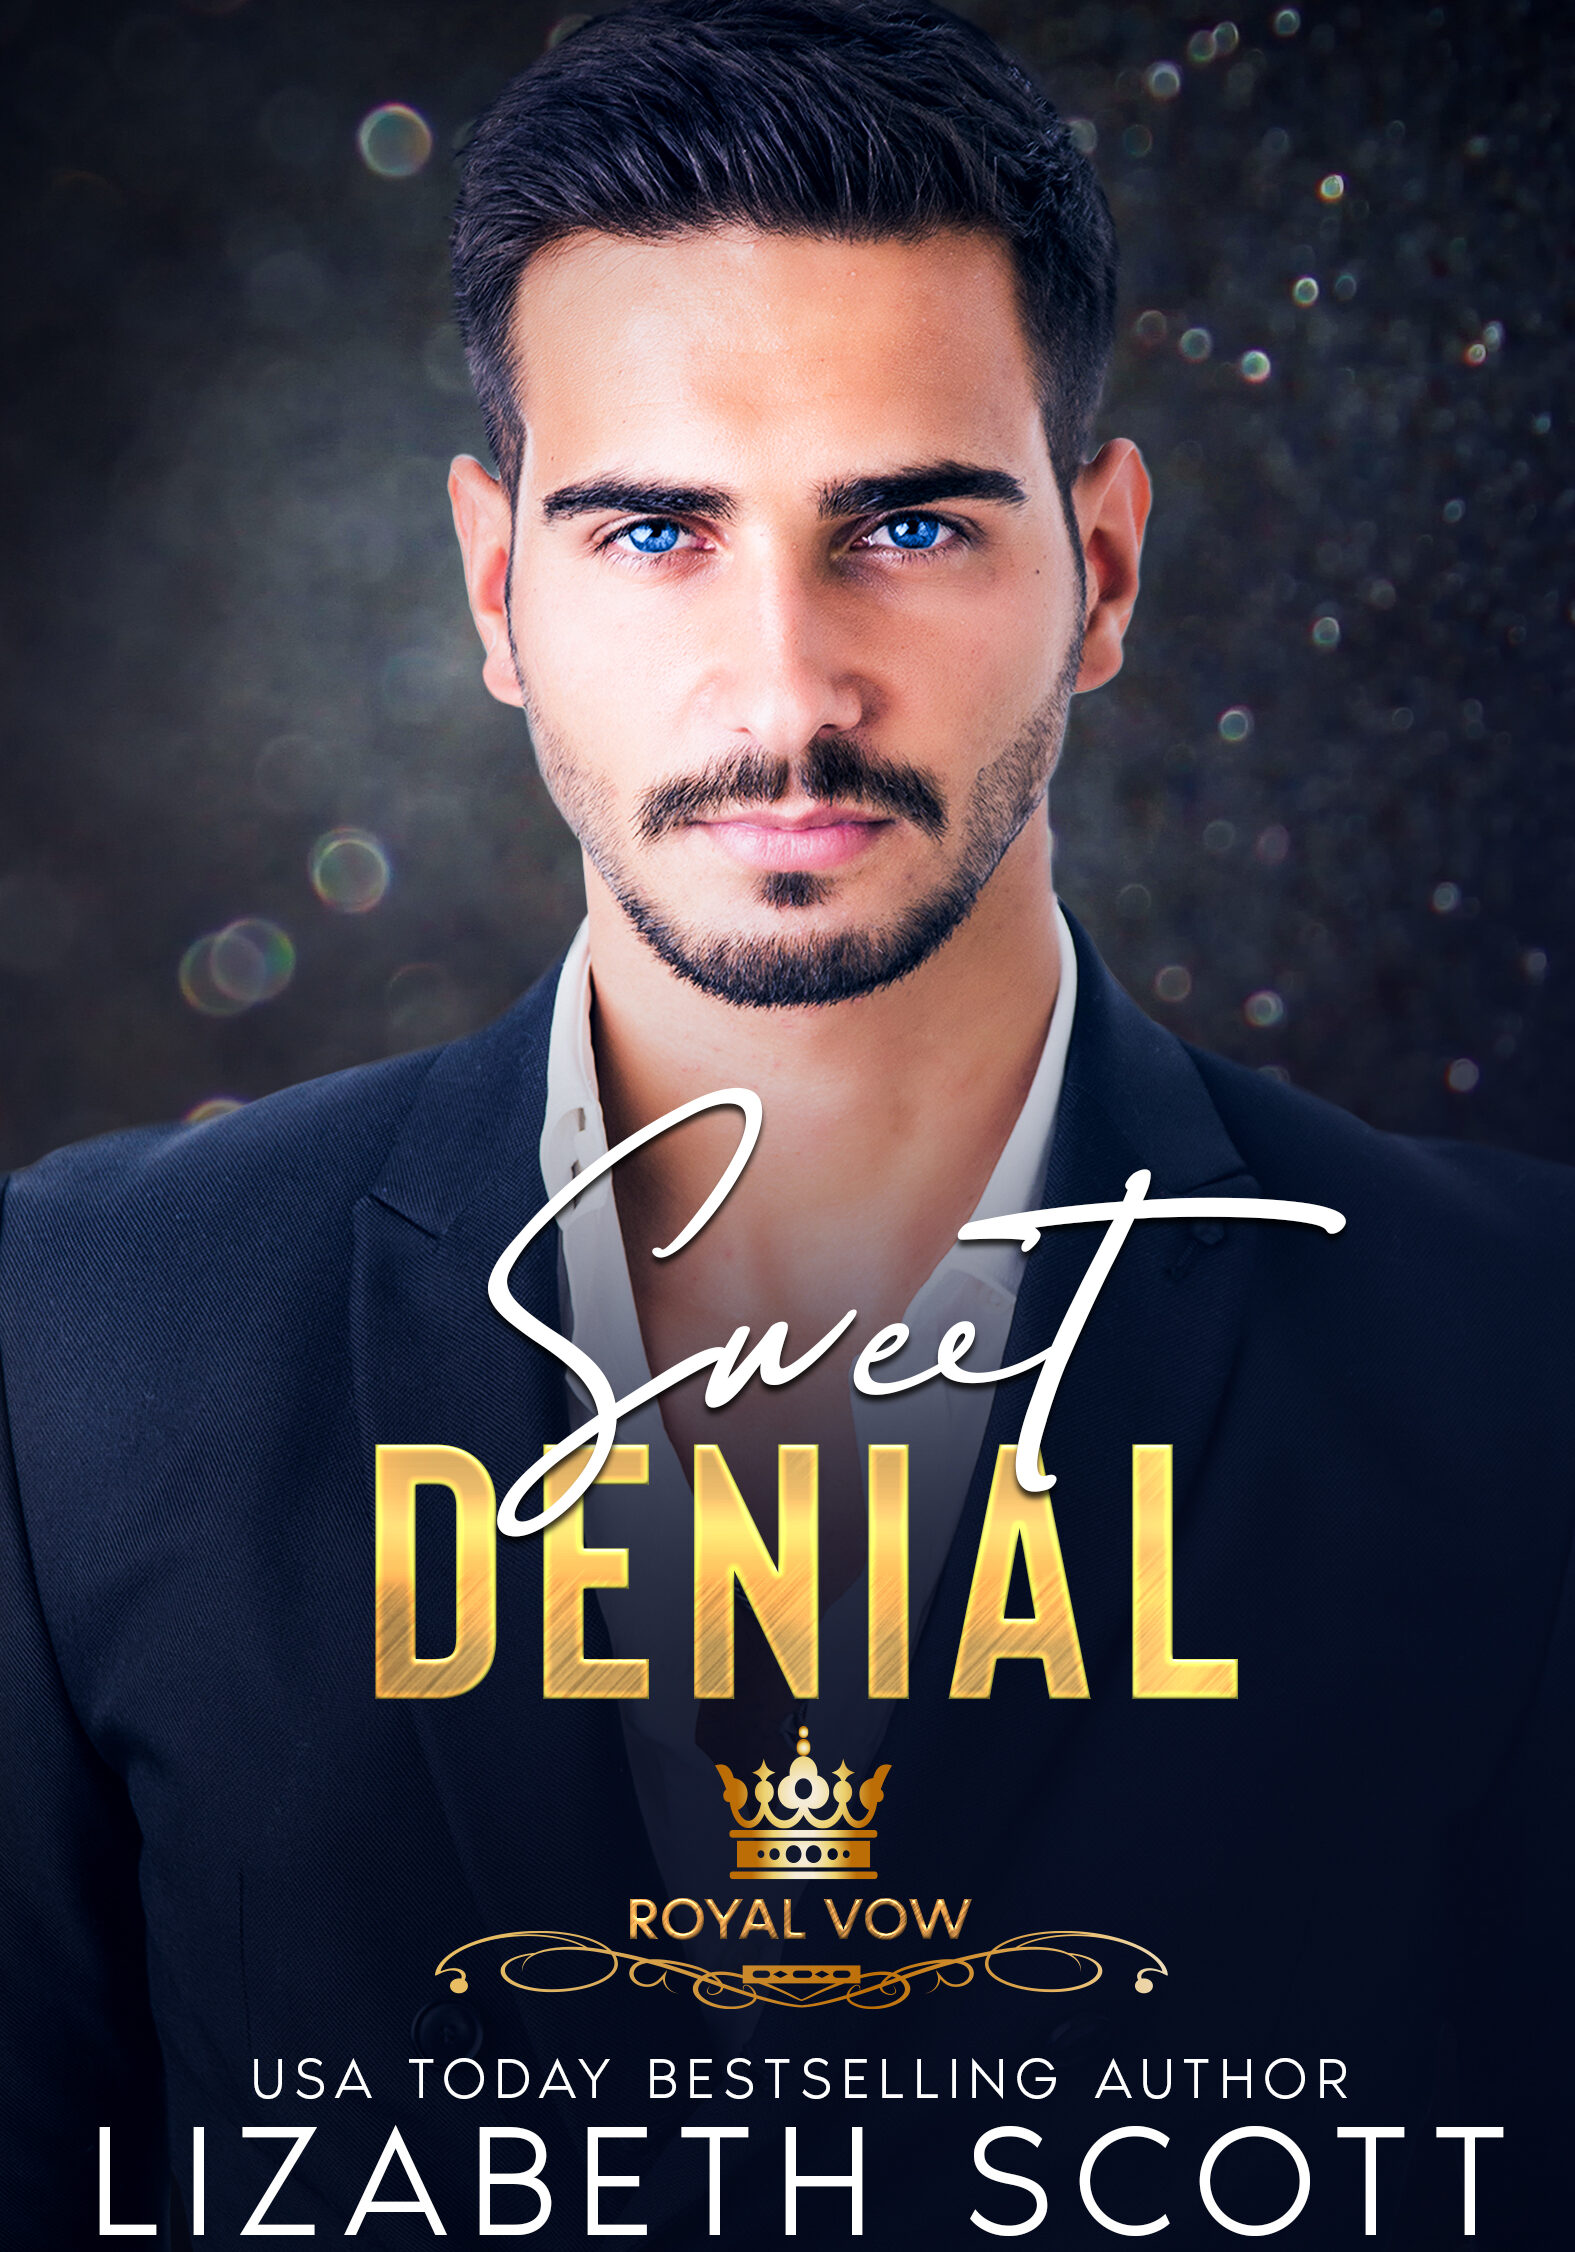 Sweet Denial: The Royal Vow Series by USA Today Bestselling author of contemporary romance Lizabeth Scott.
